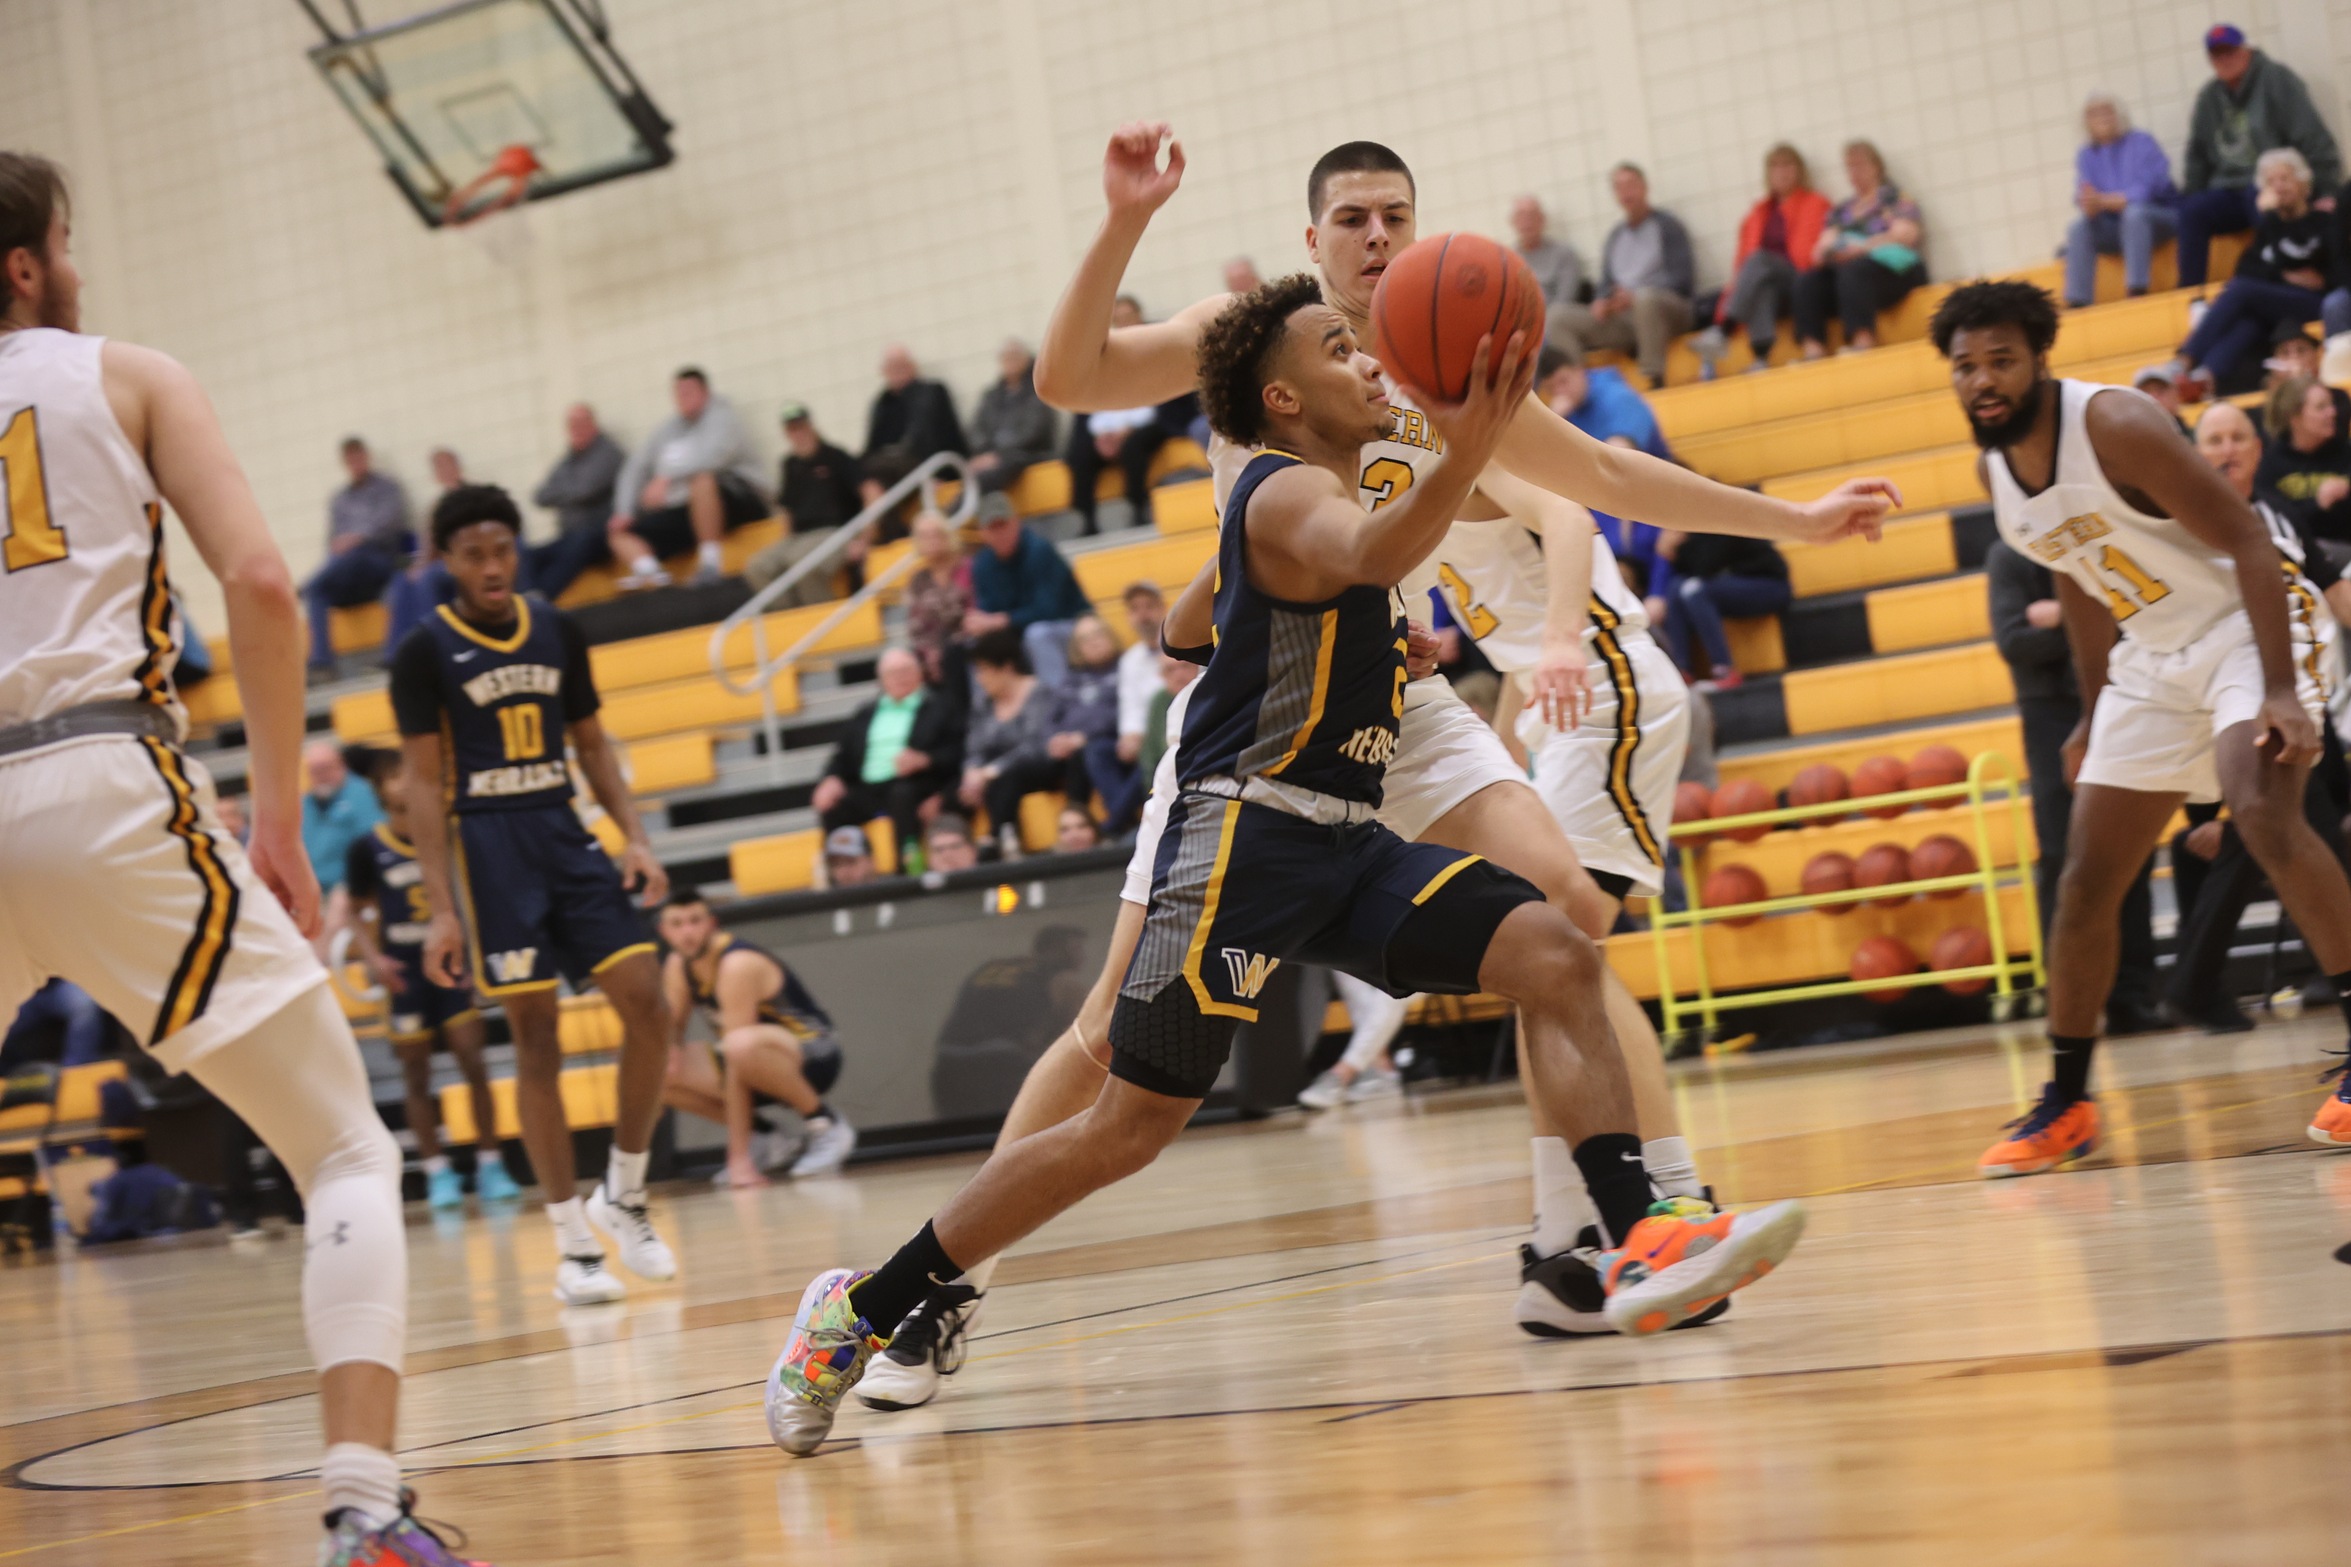 WNCC and EWC overtime battle.